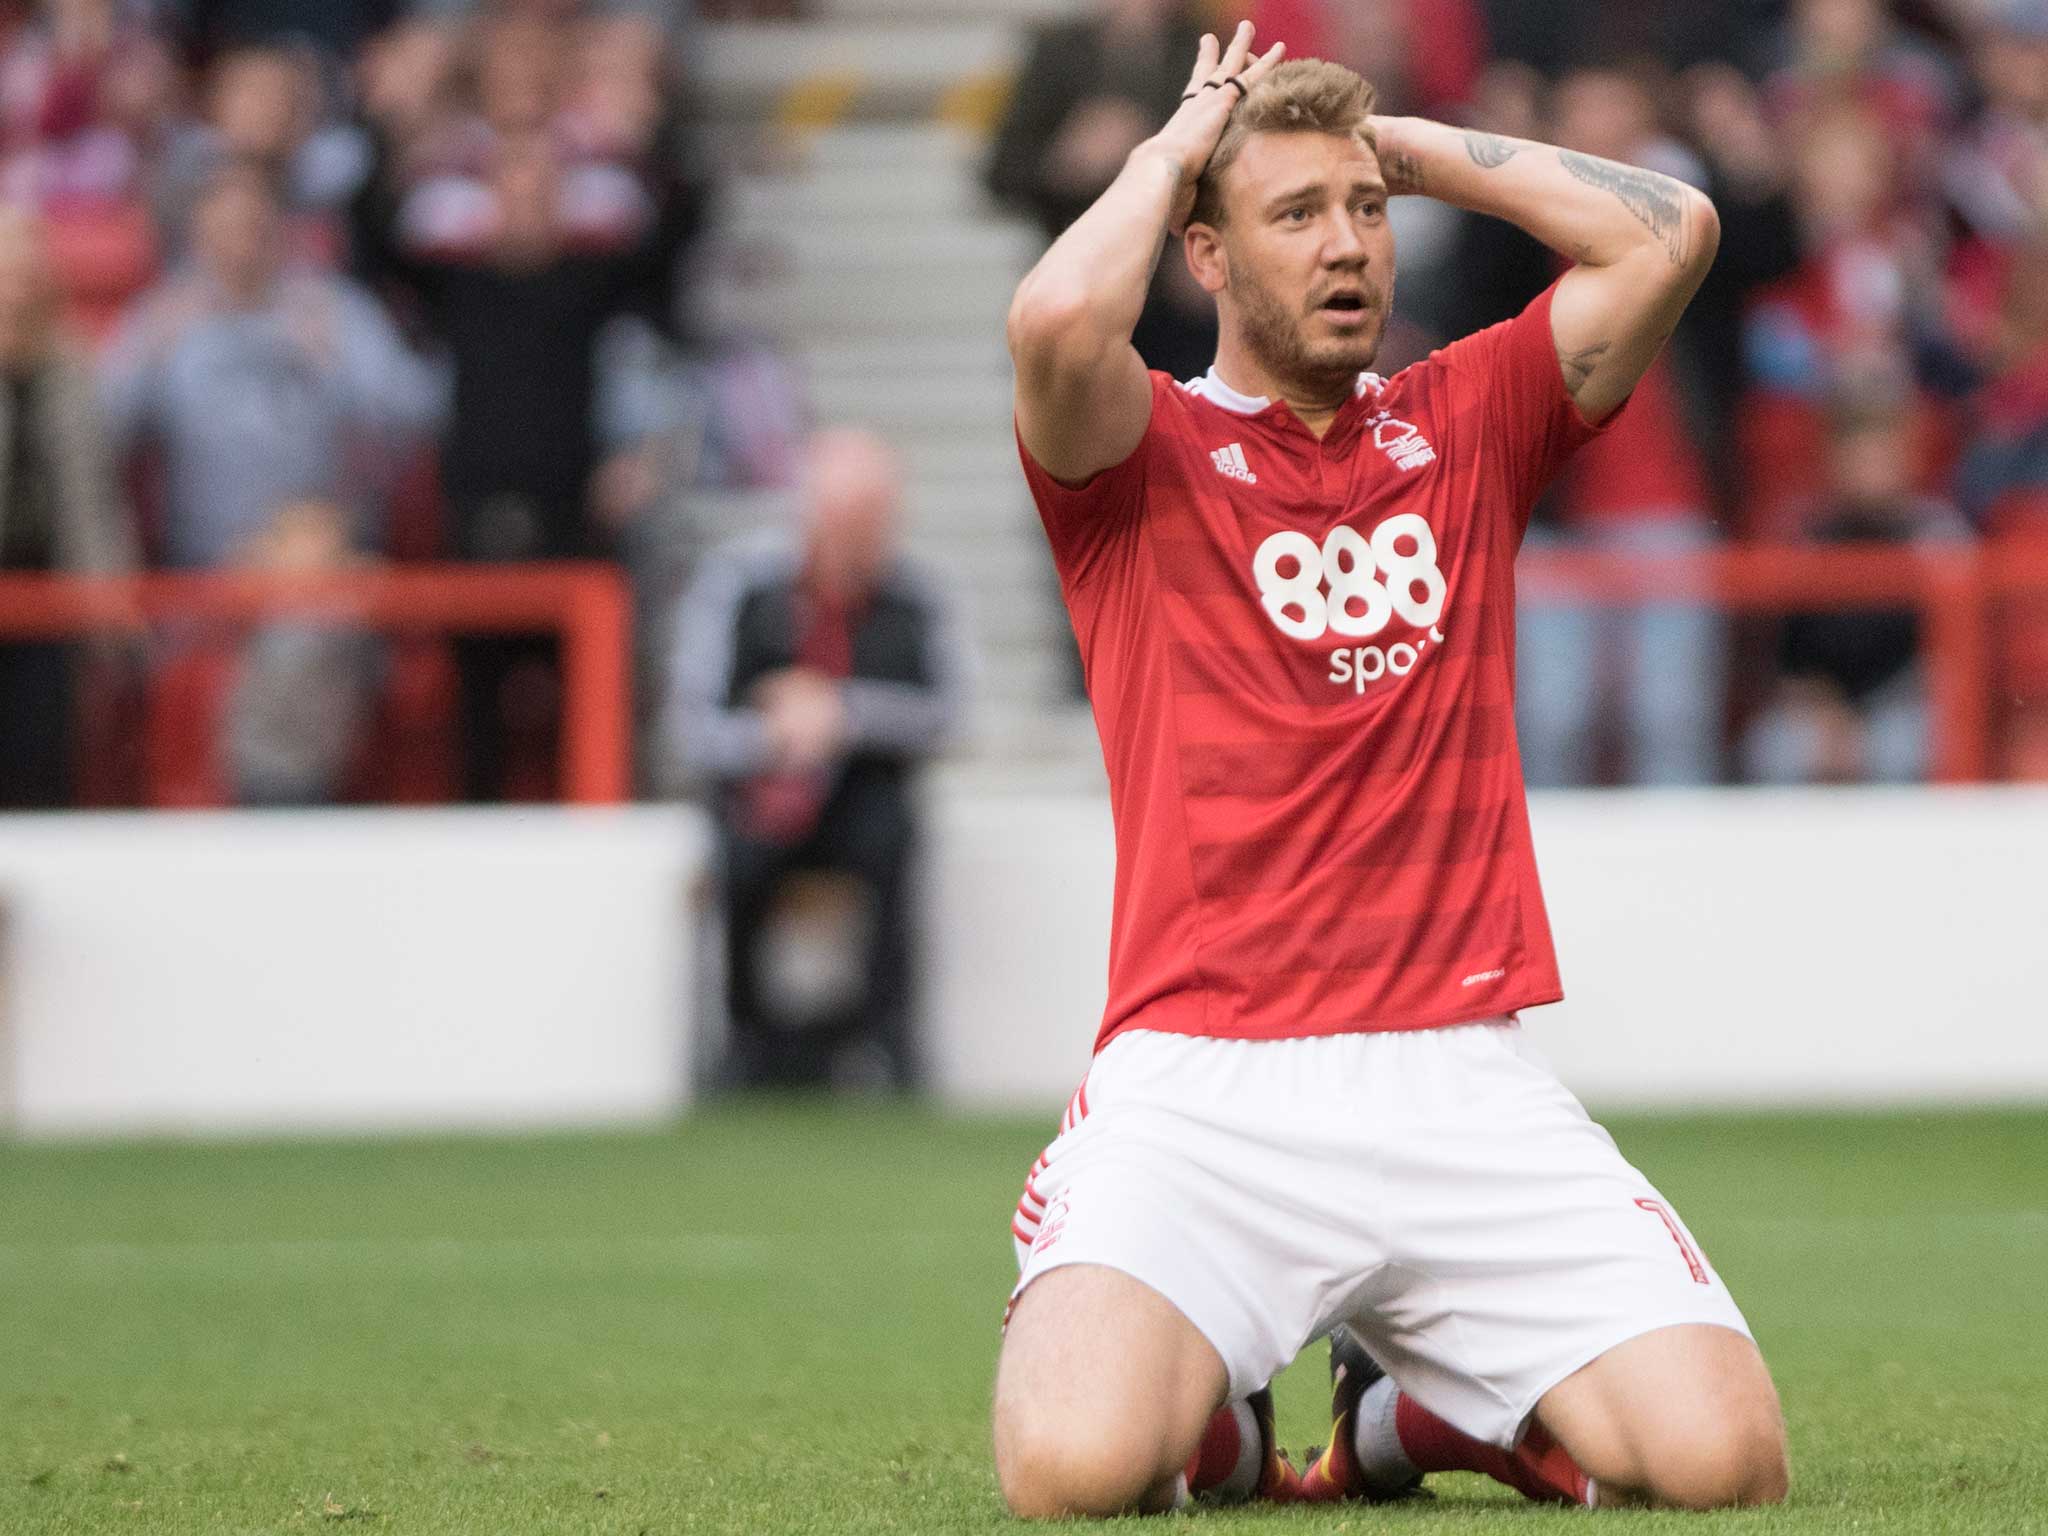 Nicklas Bendtner is now playing his football in the Championship with Nottingham Forest